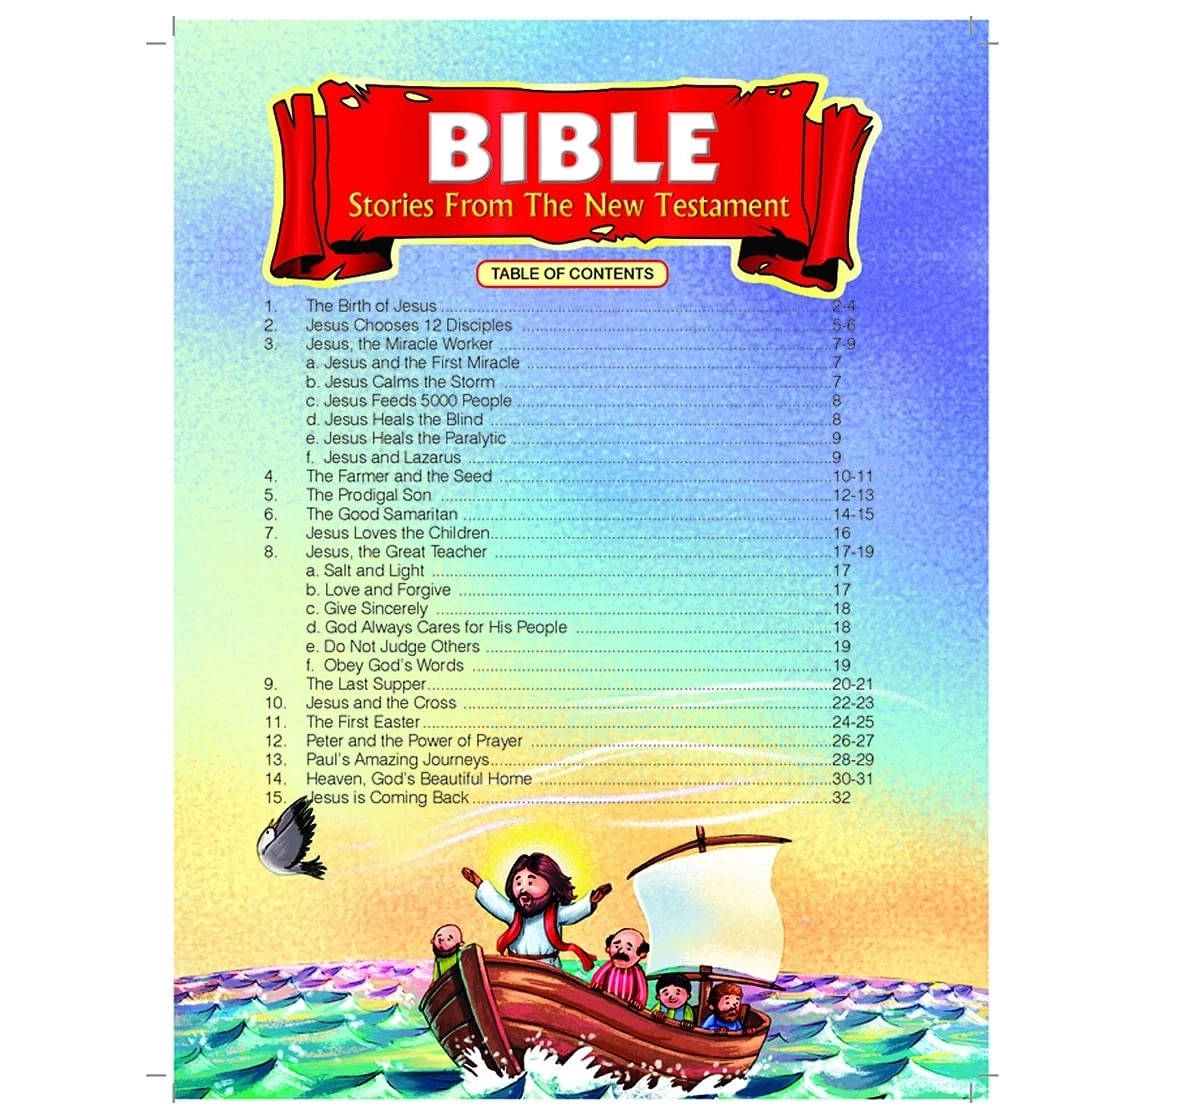 Dreamland Paper Back Bible Old Testament Story Books for kids 5Y+, Multicolour